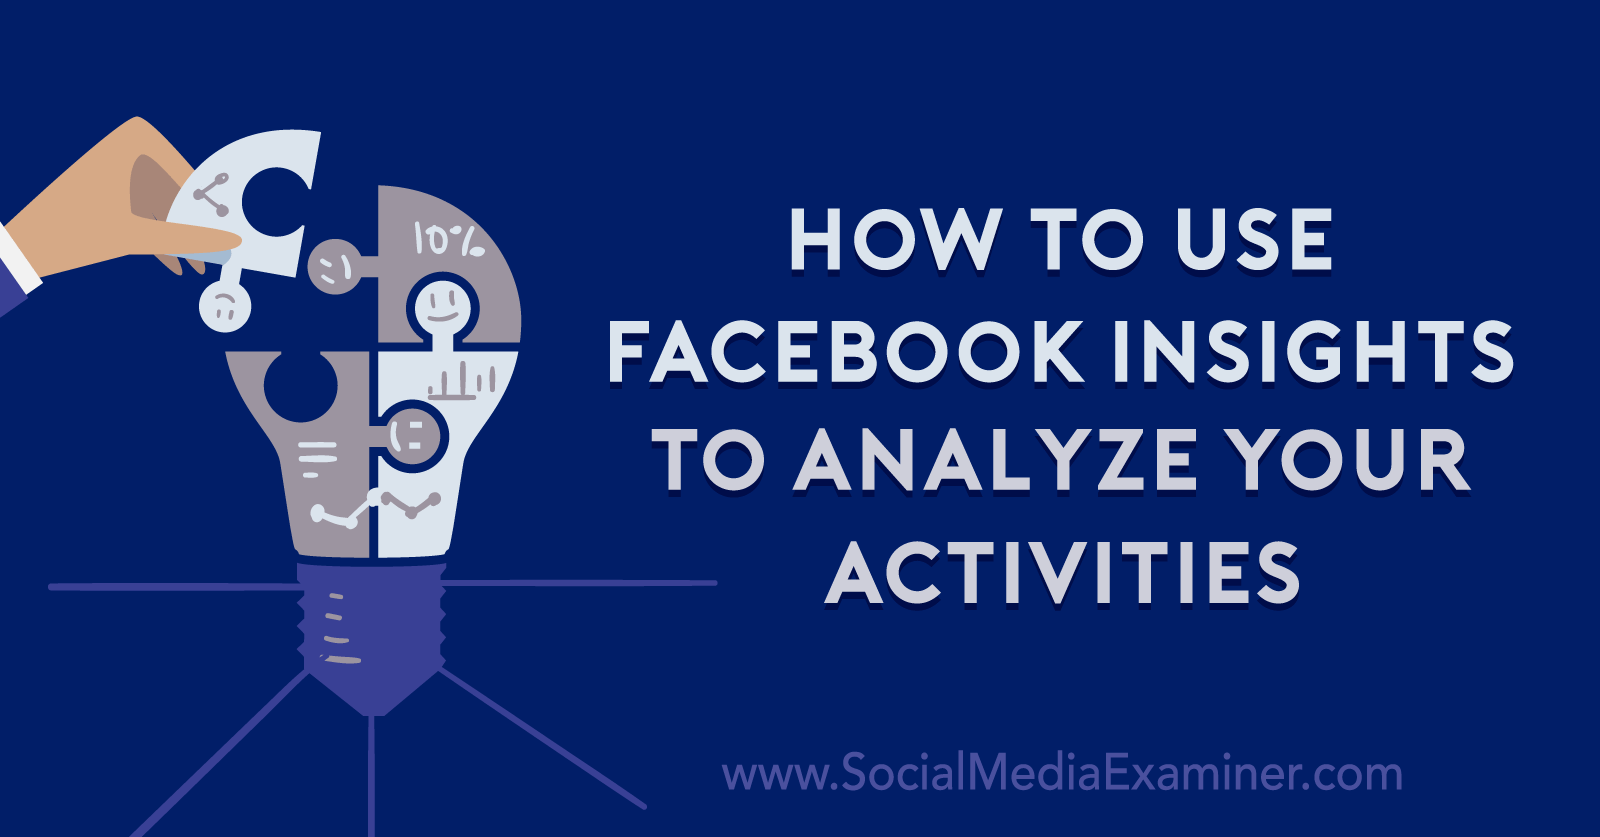 How to Use Facebook Insights to Analyze Your Activities by Anna Sonnenberg